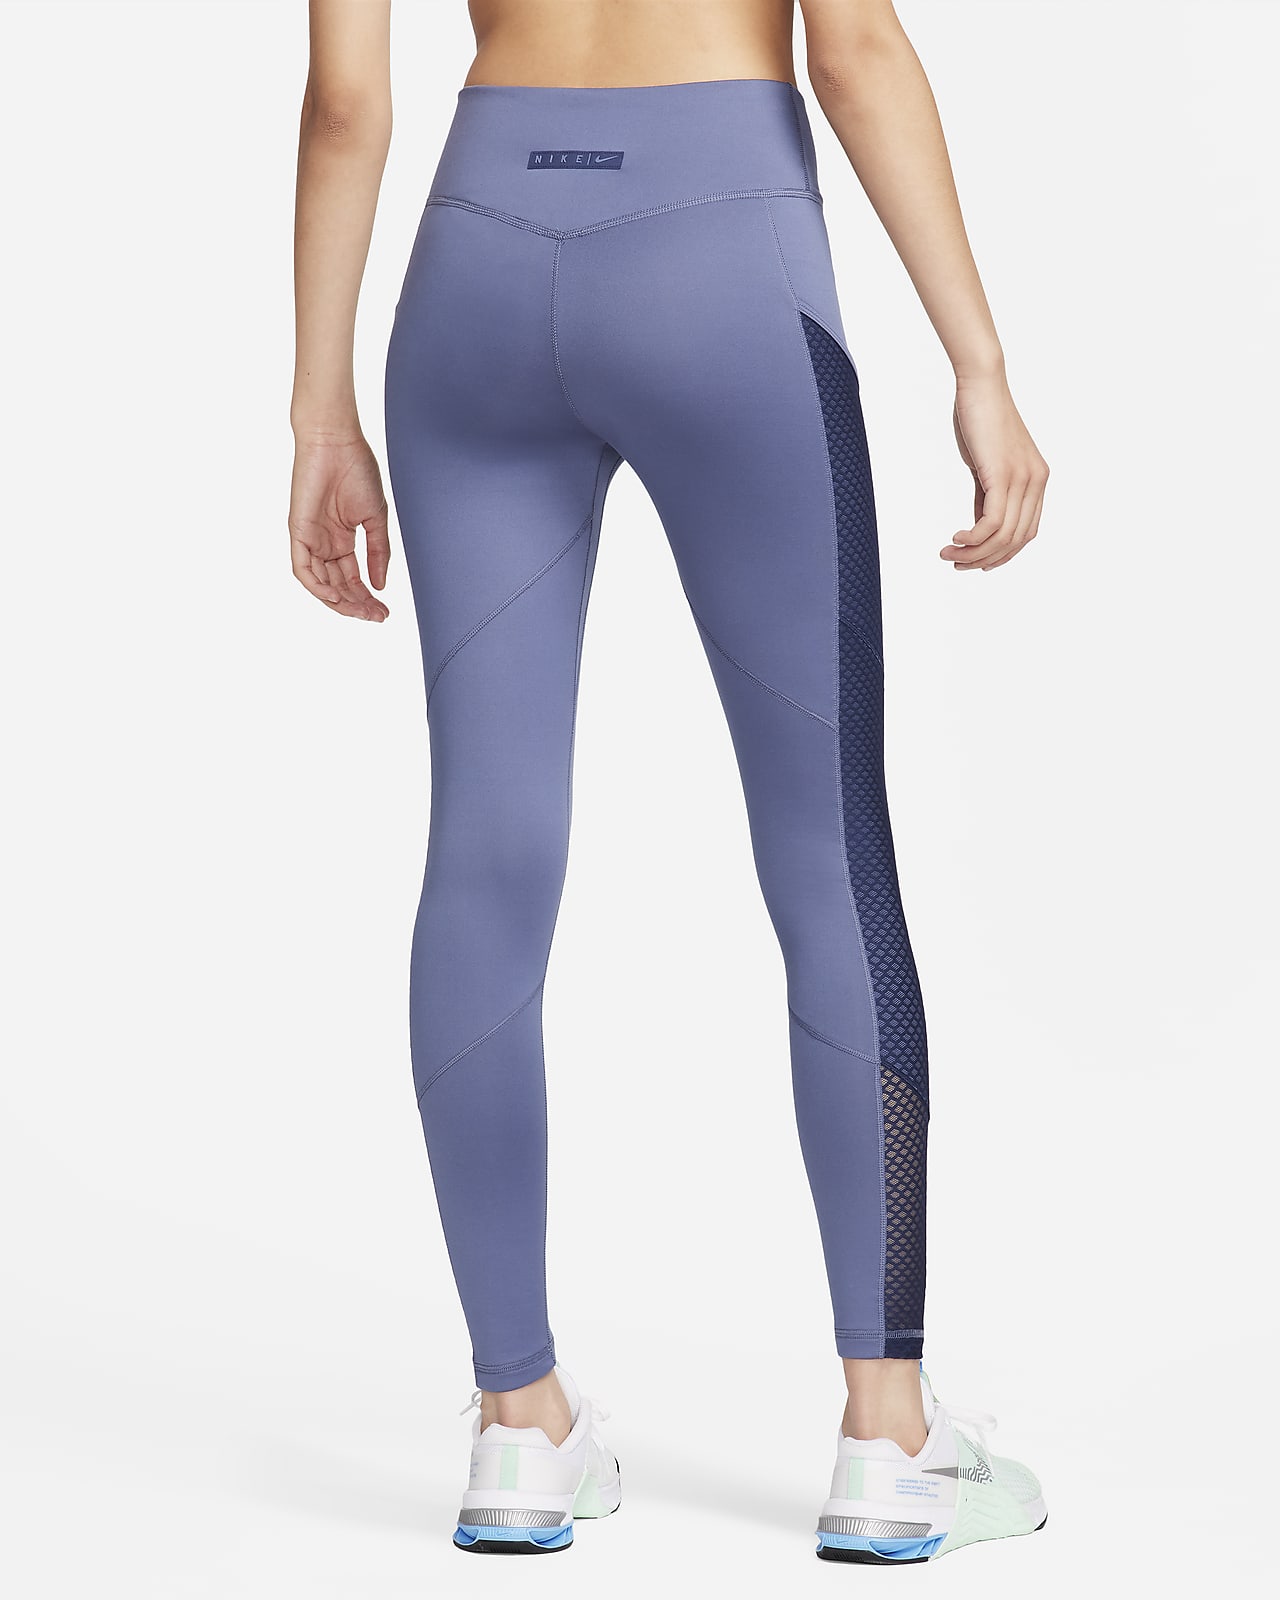 Nike One Tight Fit Mid Rise Full Length Leggings - Size S - Dry